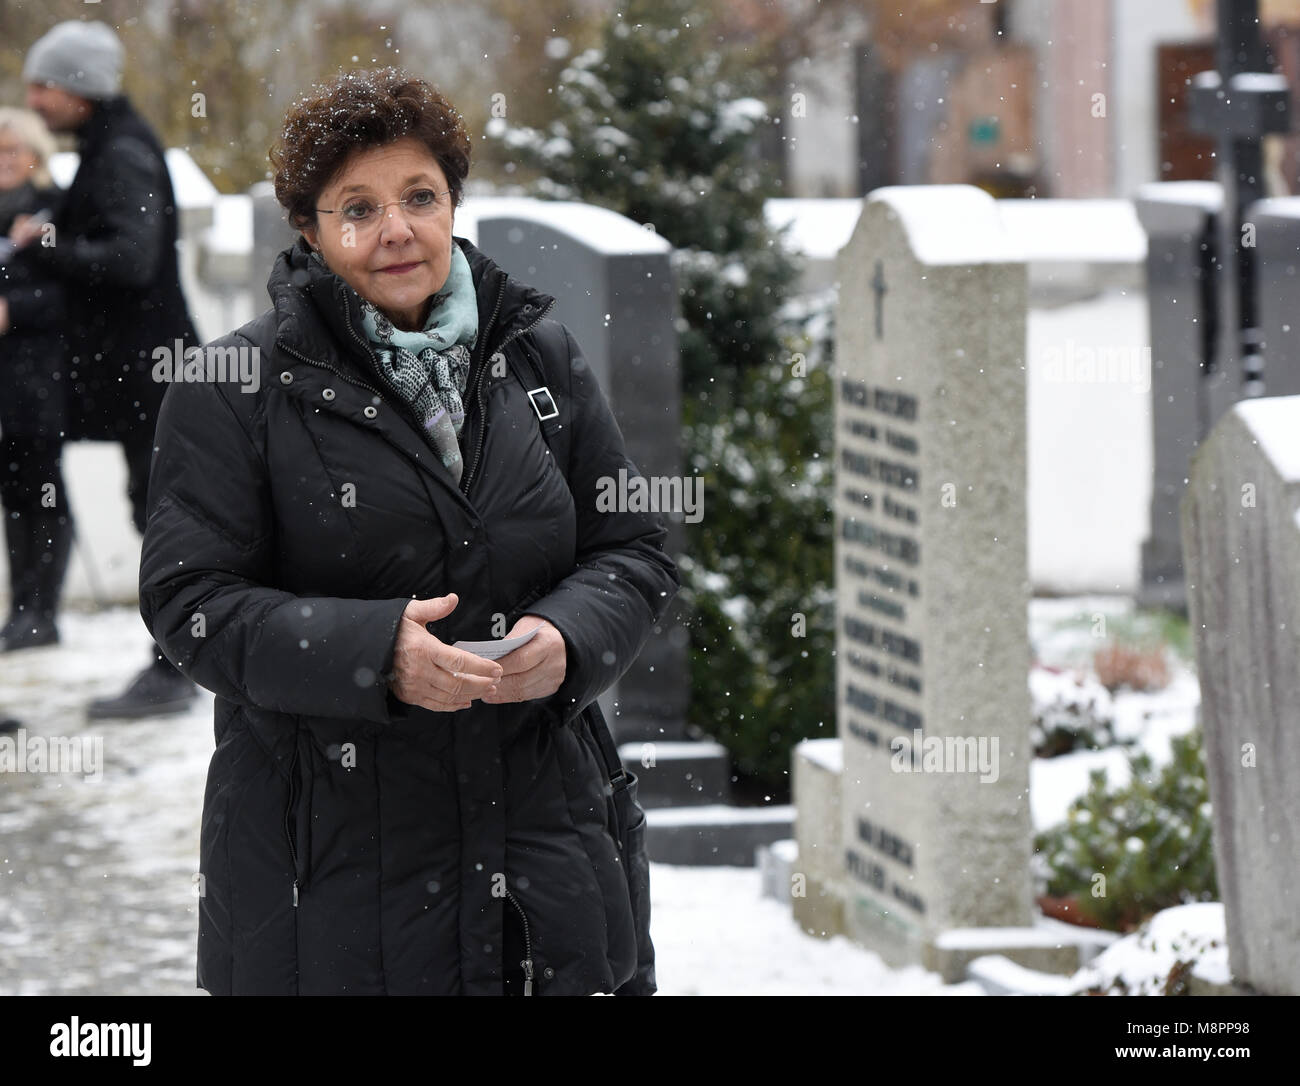 19 March 2018, Germany, Habach: The actress Monika Baumgartner ('Bergdoktor' lit. mountain doctor) attends the memorial service for actor Rauch. The actor died of heart failure on 11 March at the age of 85. Photo: Angelika Warmuth/dpa Stock Photo